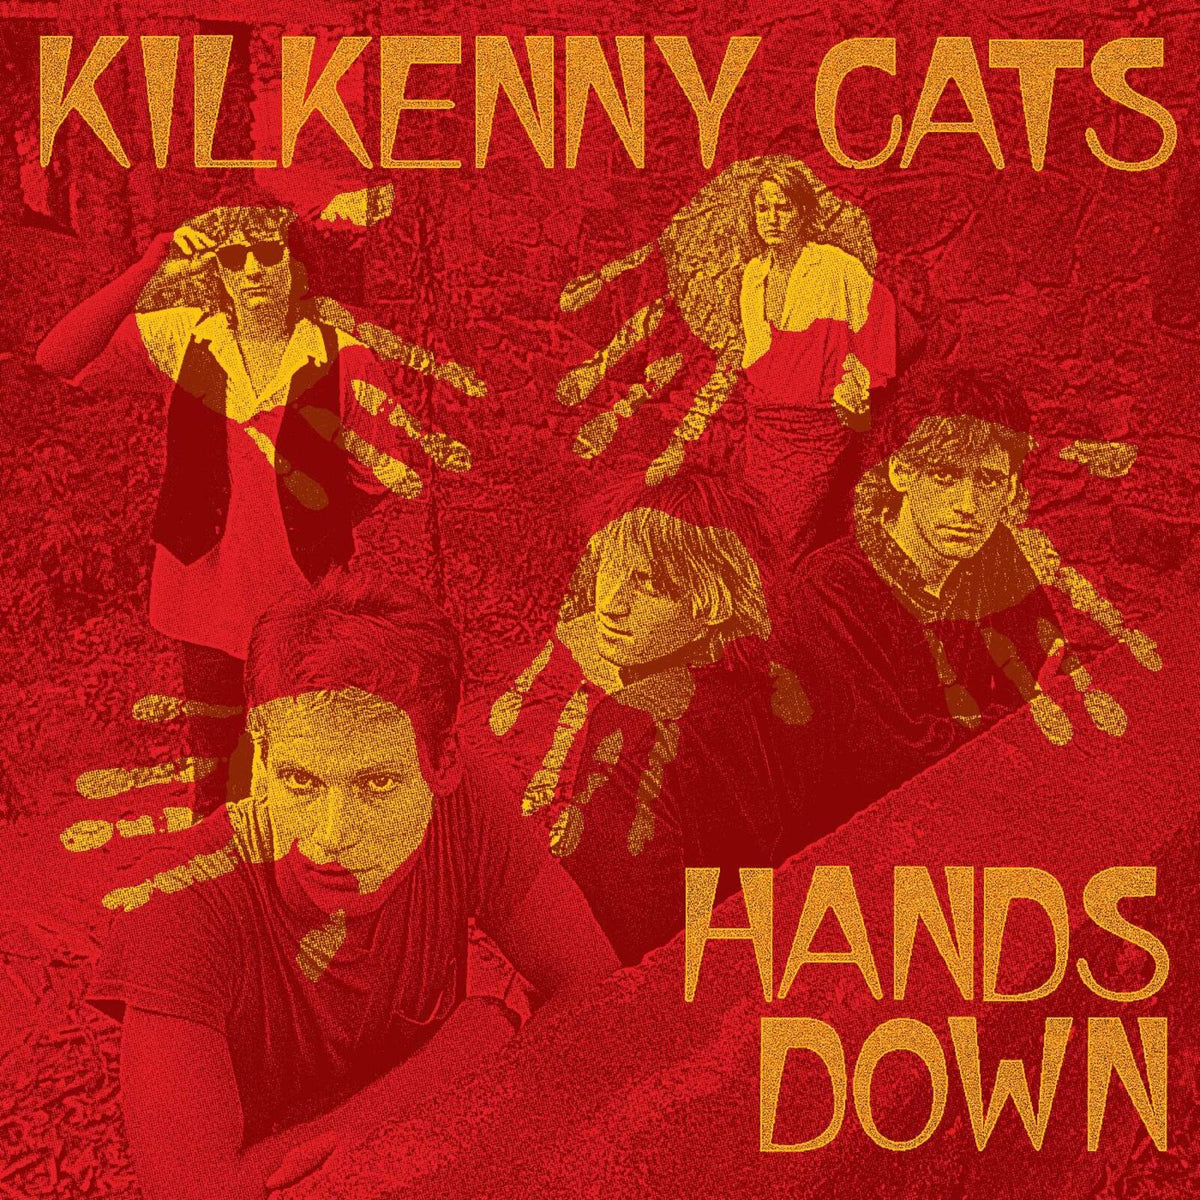 Kilkenny Cats - Hands Down [remastered Expanded Edition]